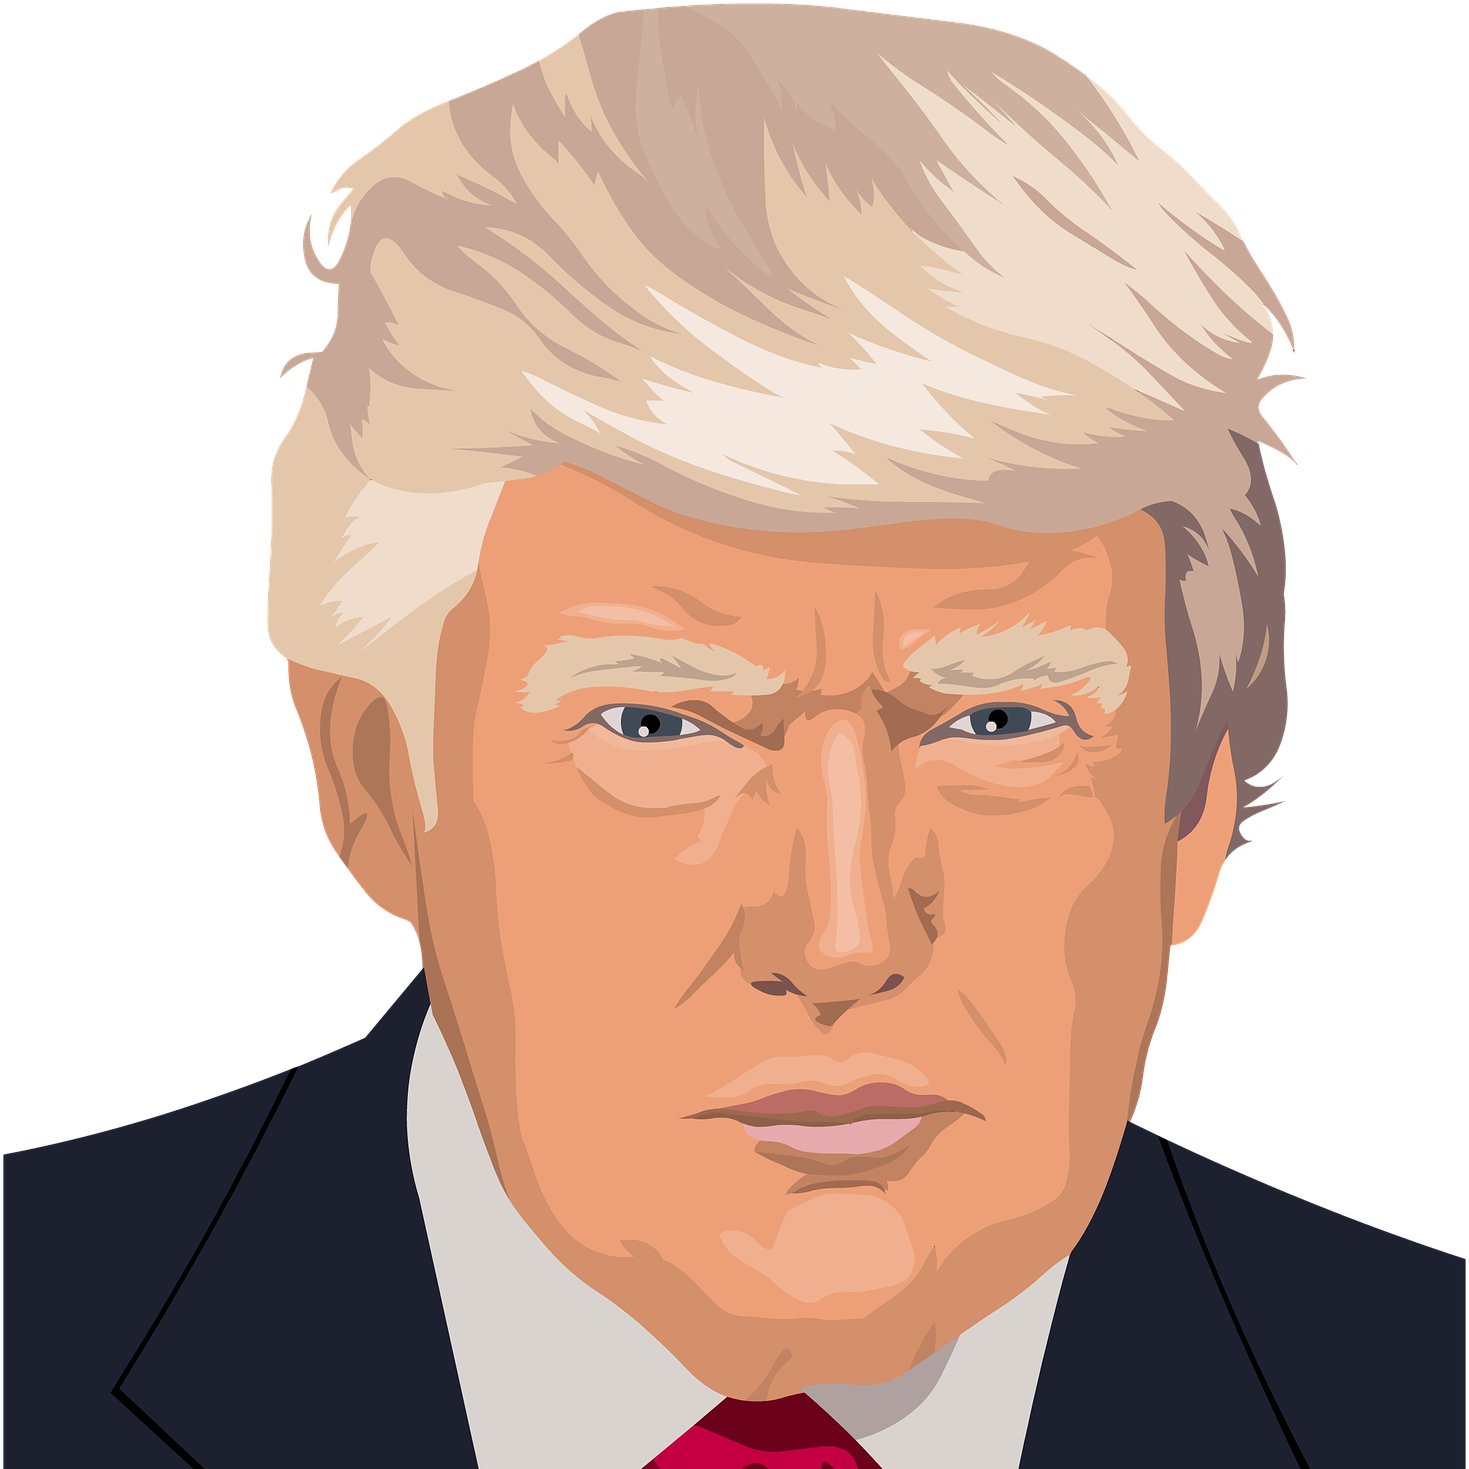 Interested in Donald Trump? This fan page will provide you the best and the latest Donald Trump related news